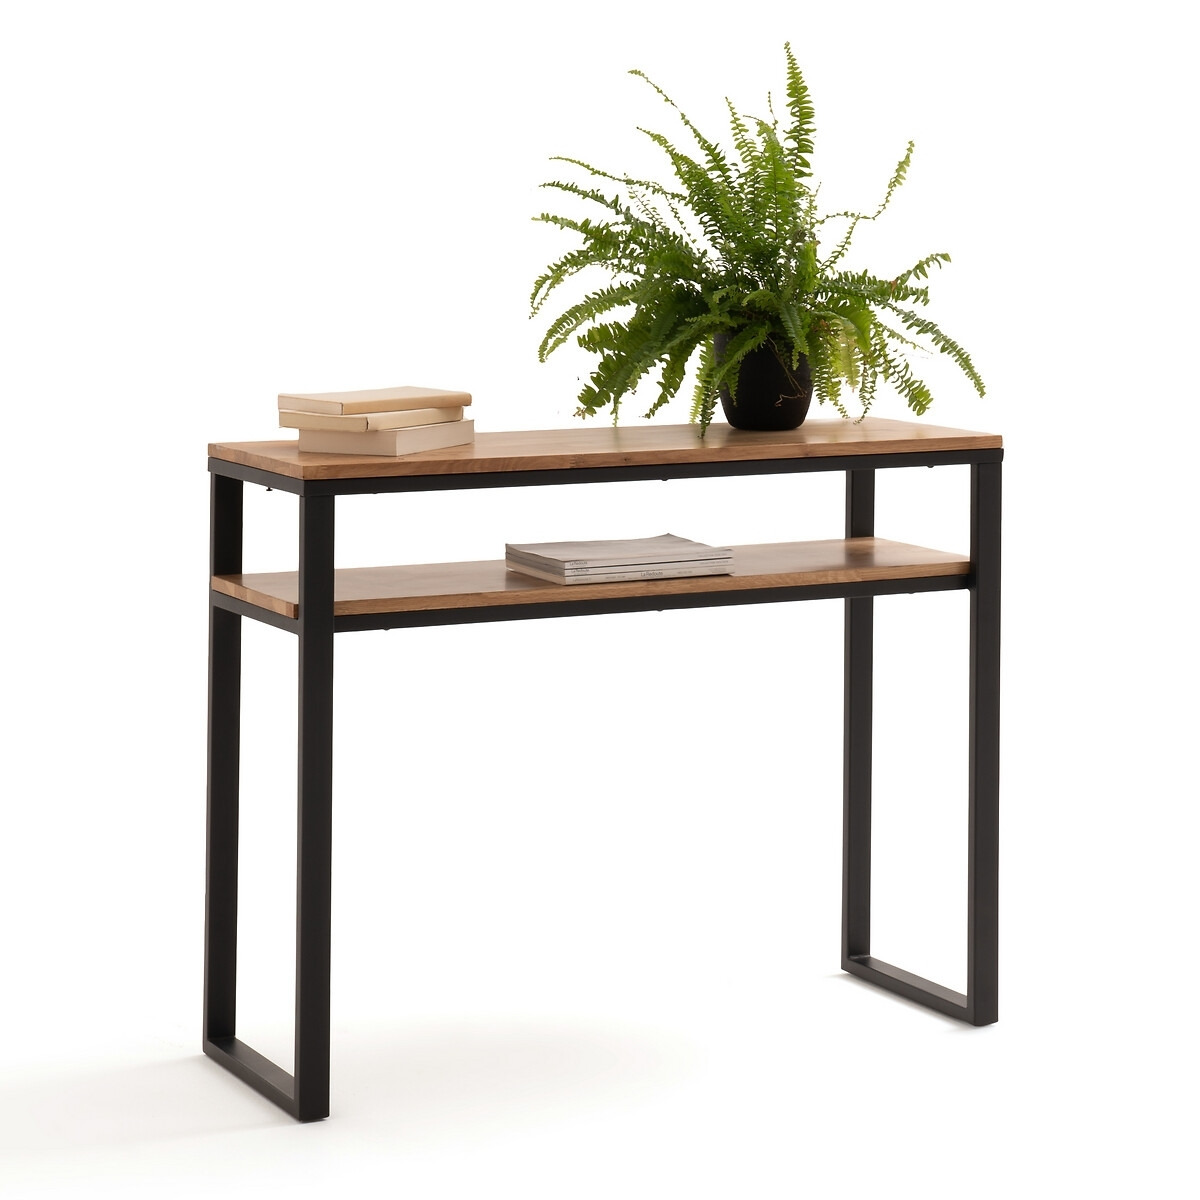 Hiba Solid Oak and Steel Console Table with 2 Shelves - image 1